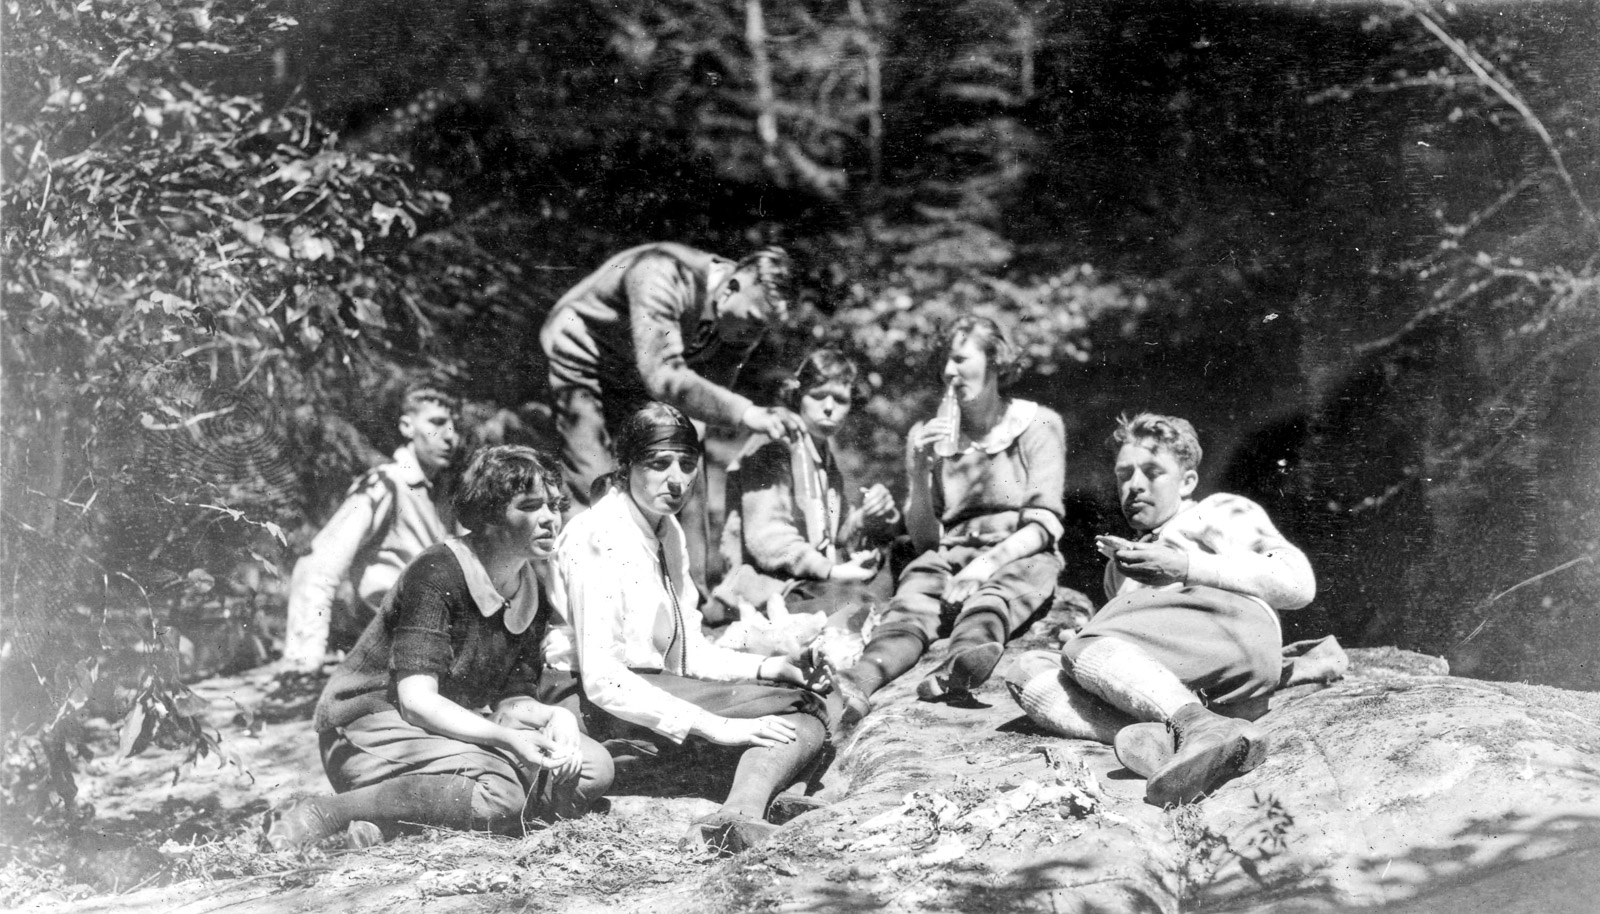 1924 - Group of hikers taking a break